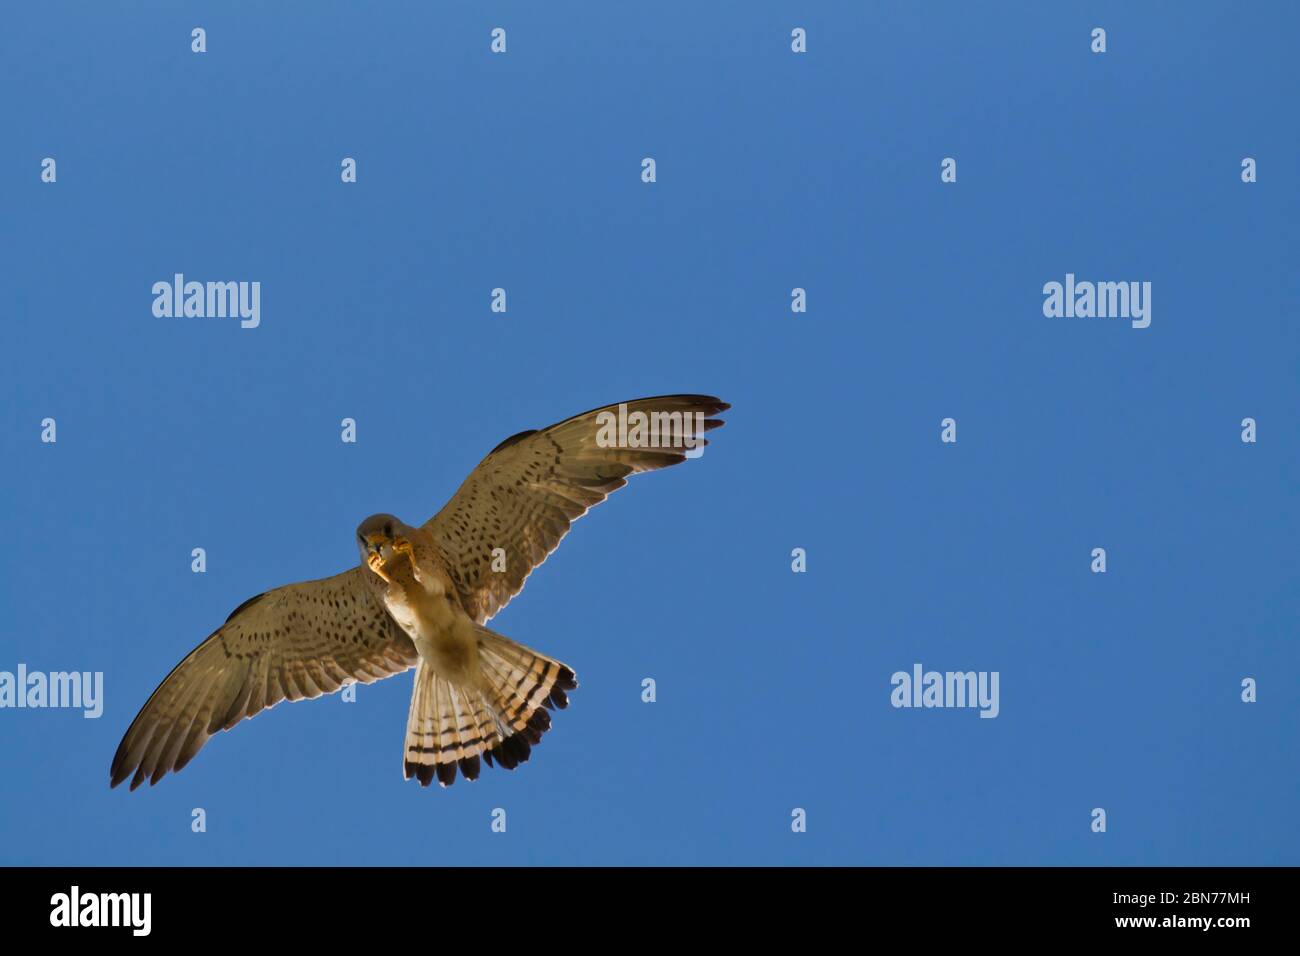 Common kestrel (Falco tinnunculus) in flight with a blue sky background . This bird of prey is a member of the falcon (Falconidae) family. It is wides Stock Photo